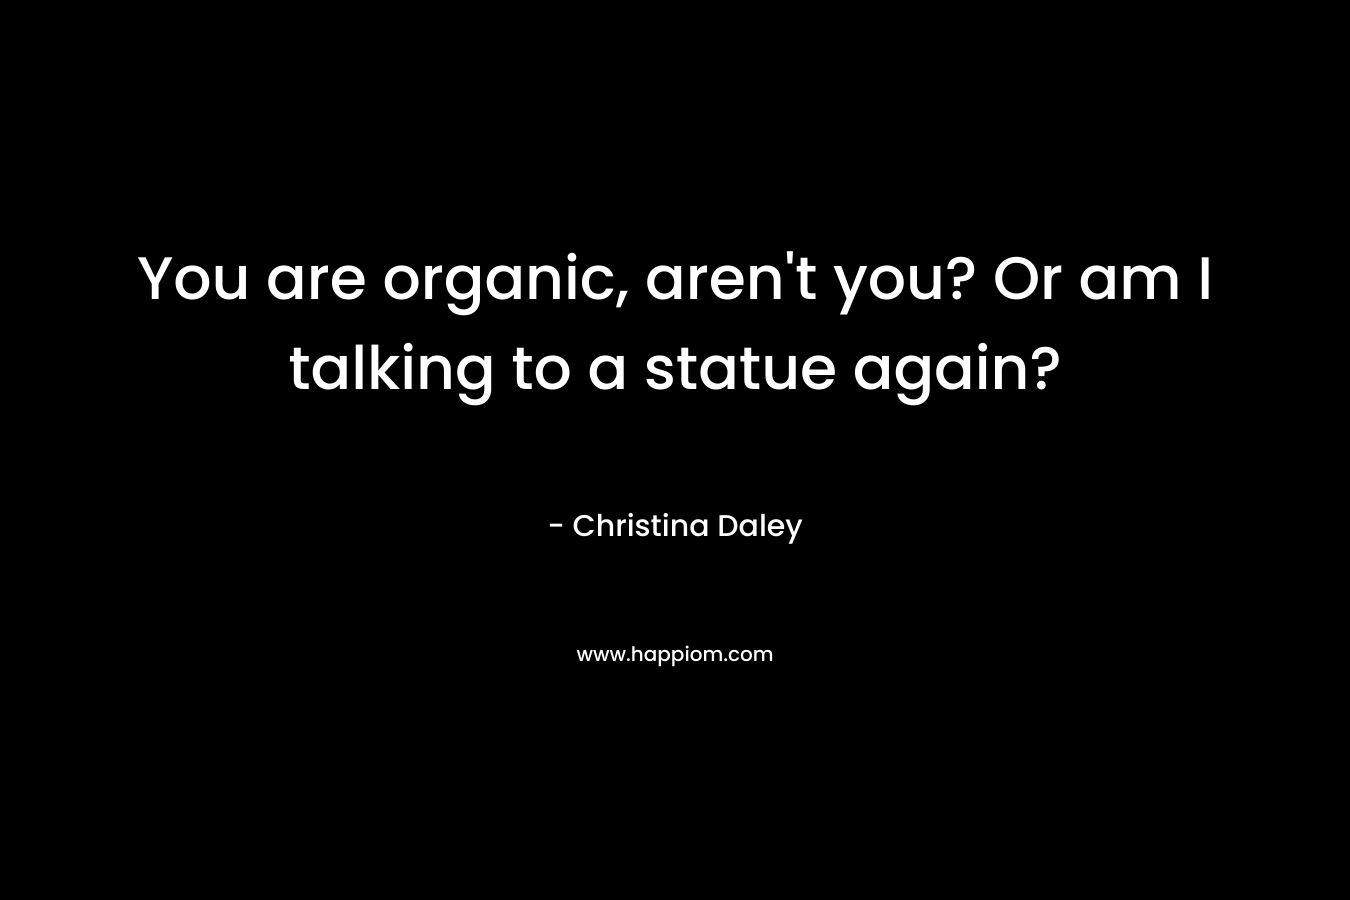 You are organic, aren’t you? Or am I talking to a statue again? – Christina Daley